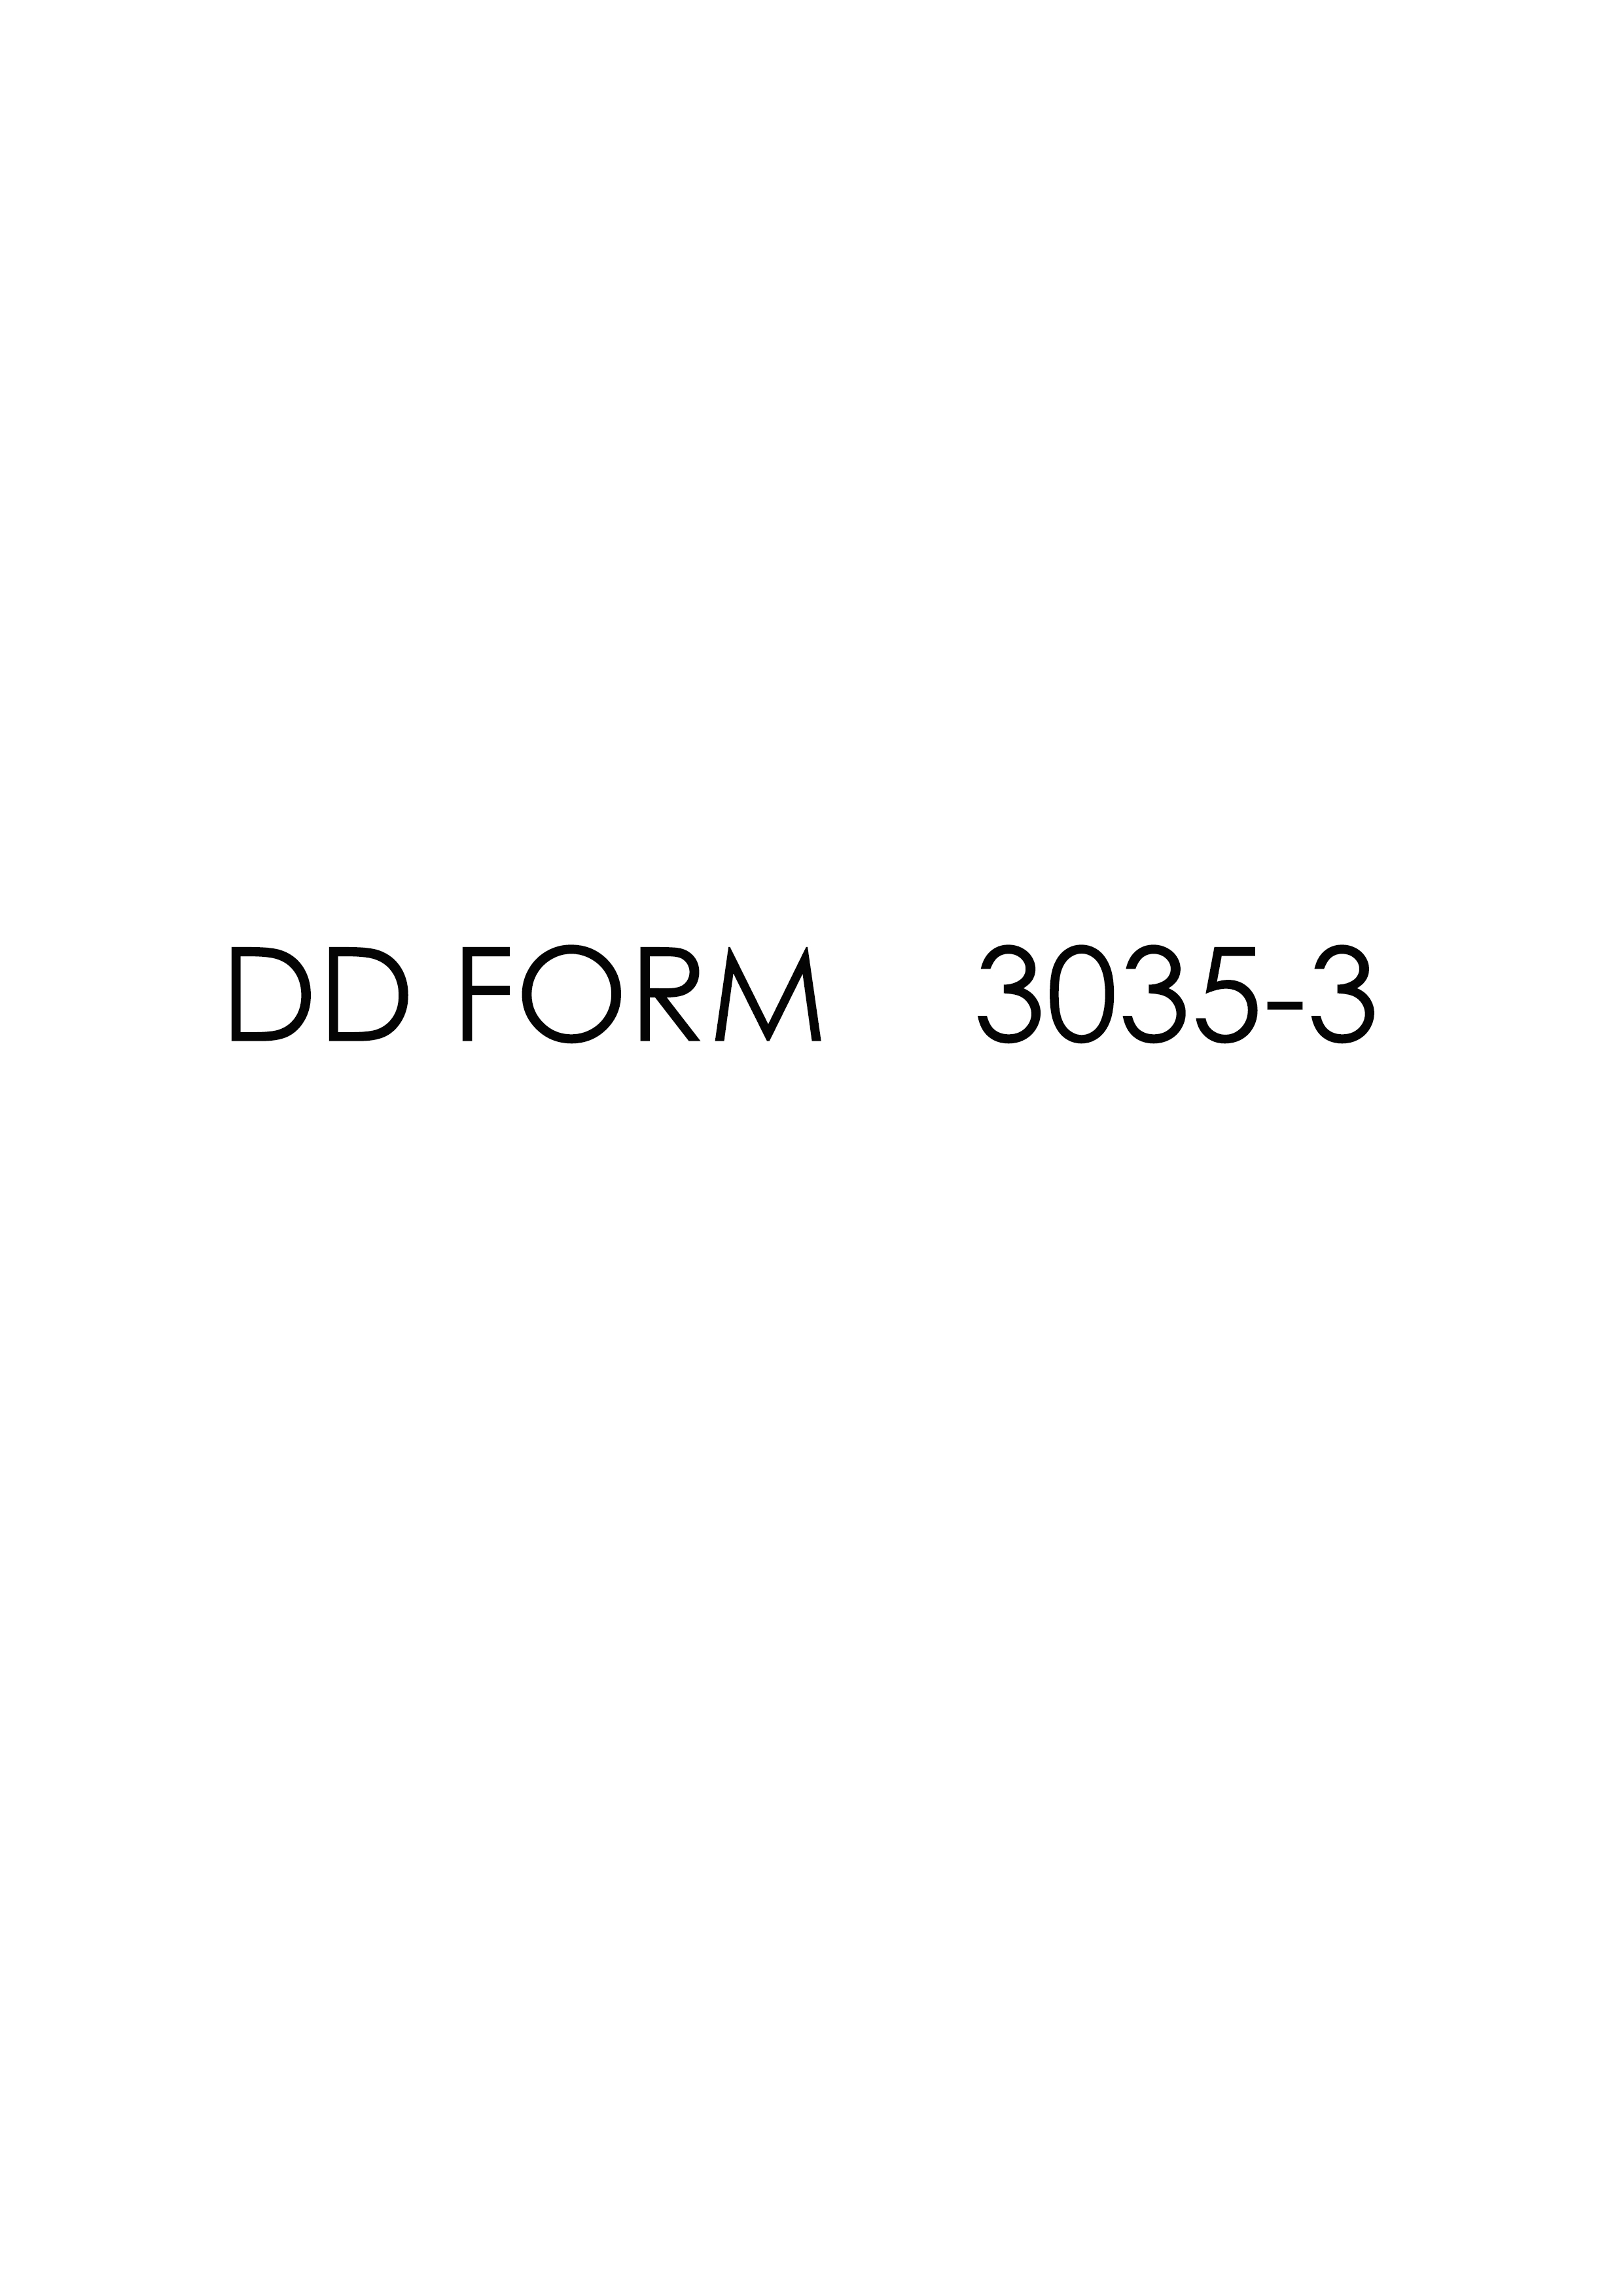 Download Fillable dd Form 3035-3